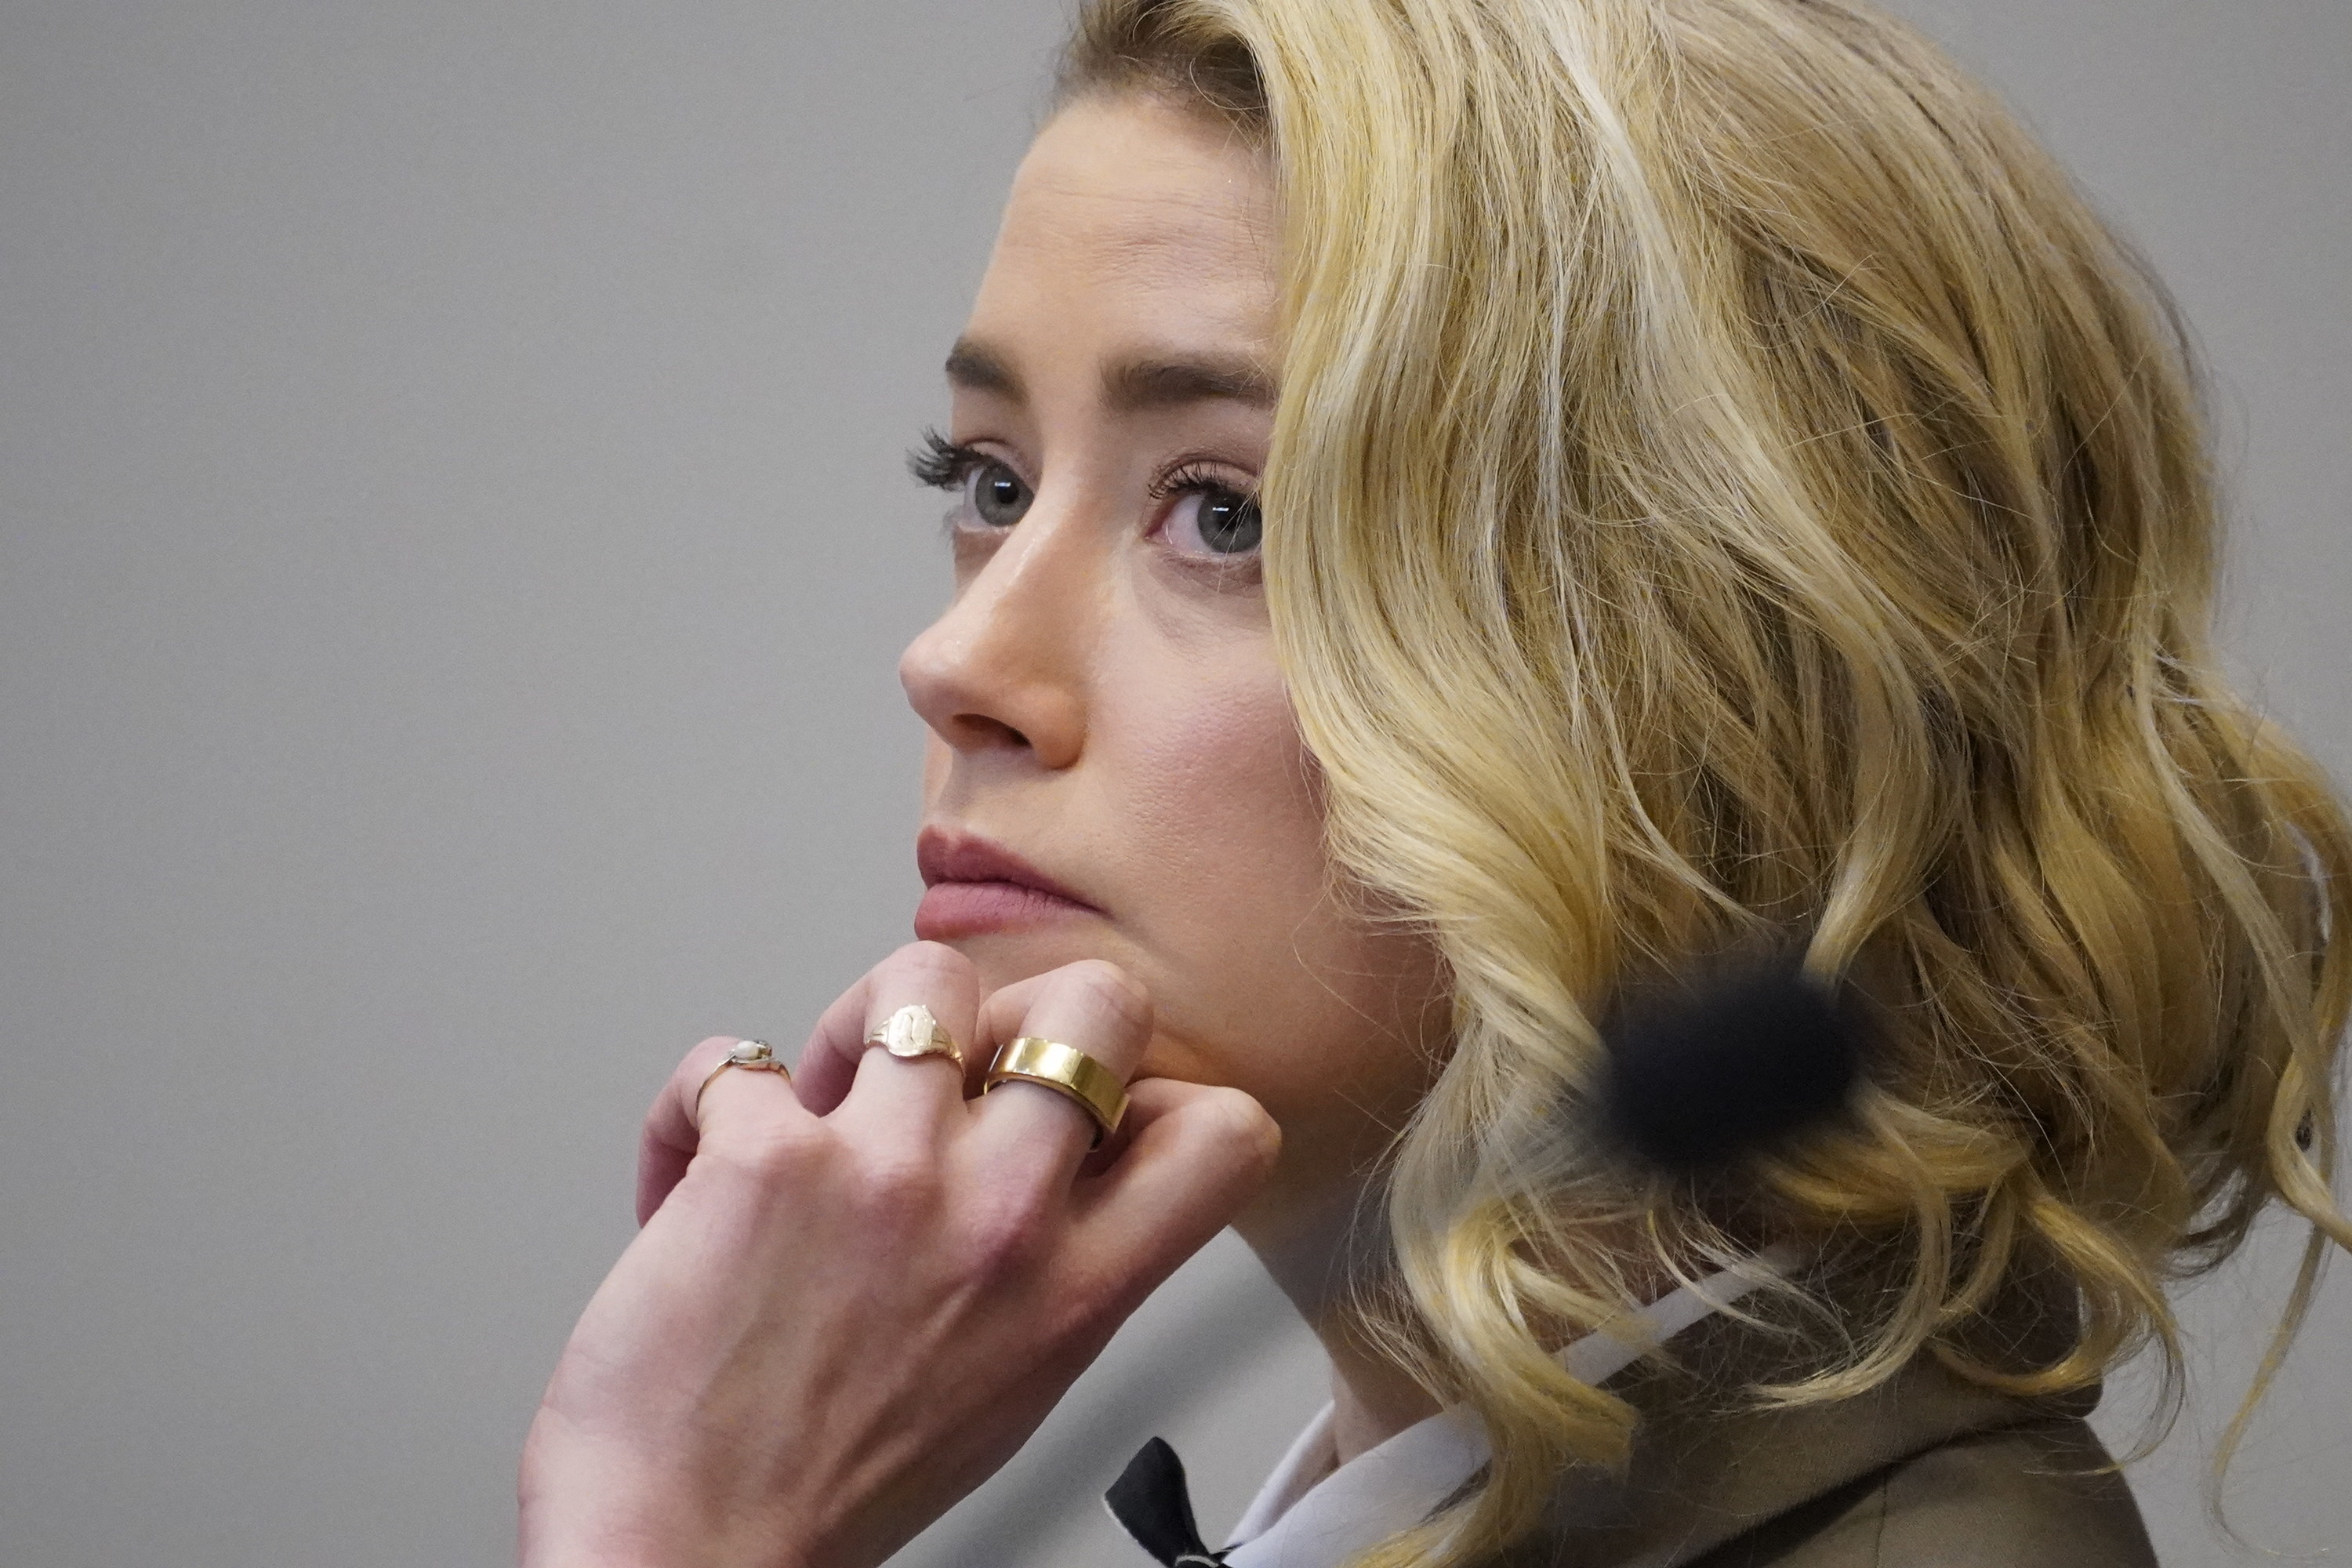 Amber Heard seen listening in the courtroom at the Fairfax County Circuit Courthouse in Fairfax, Virginia, on May 23, 2022.